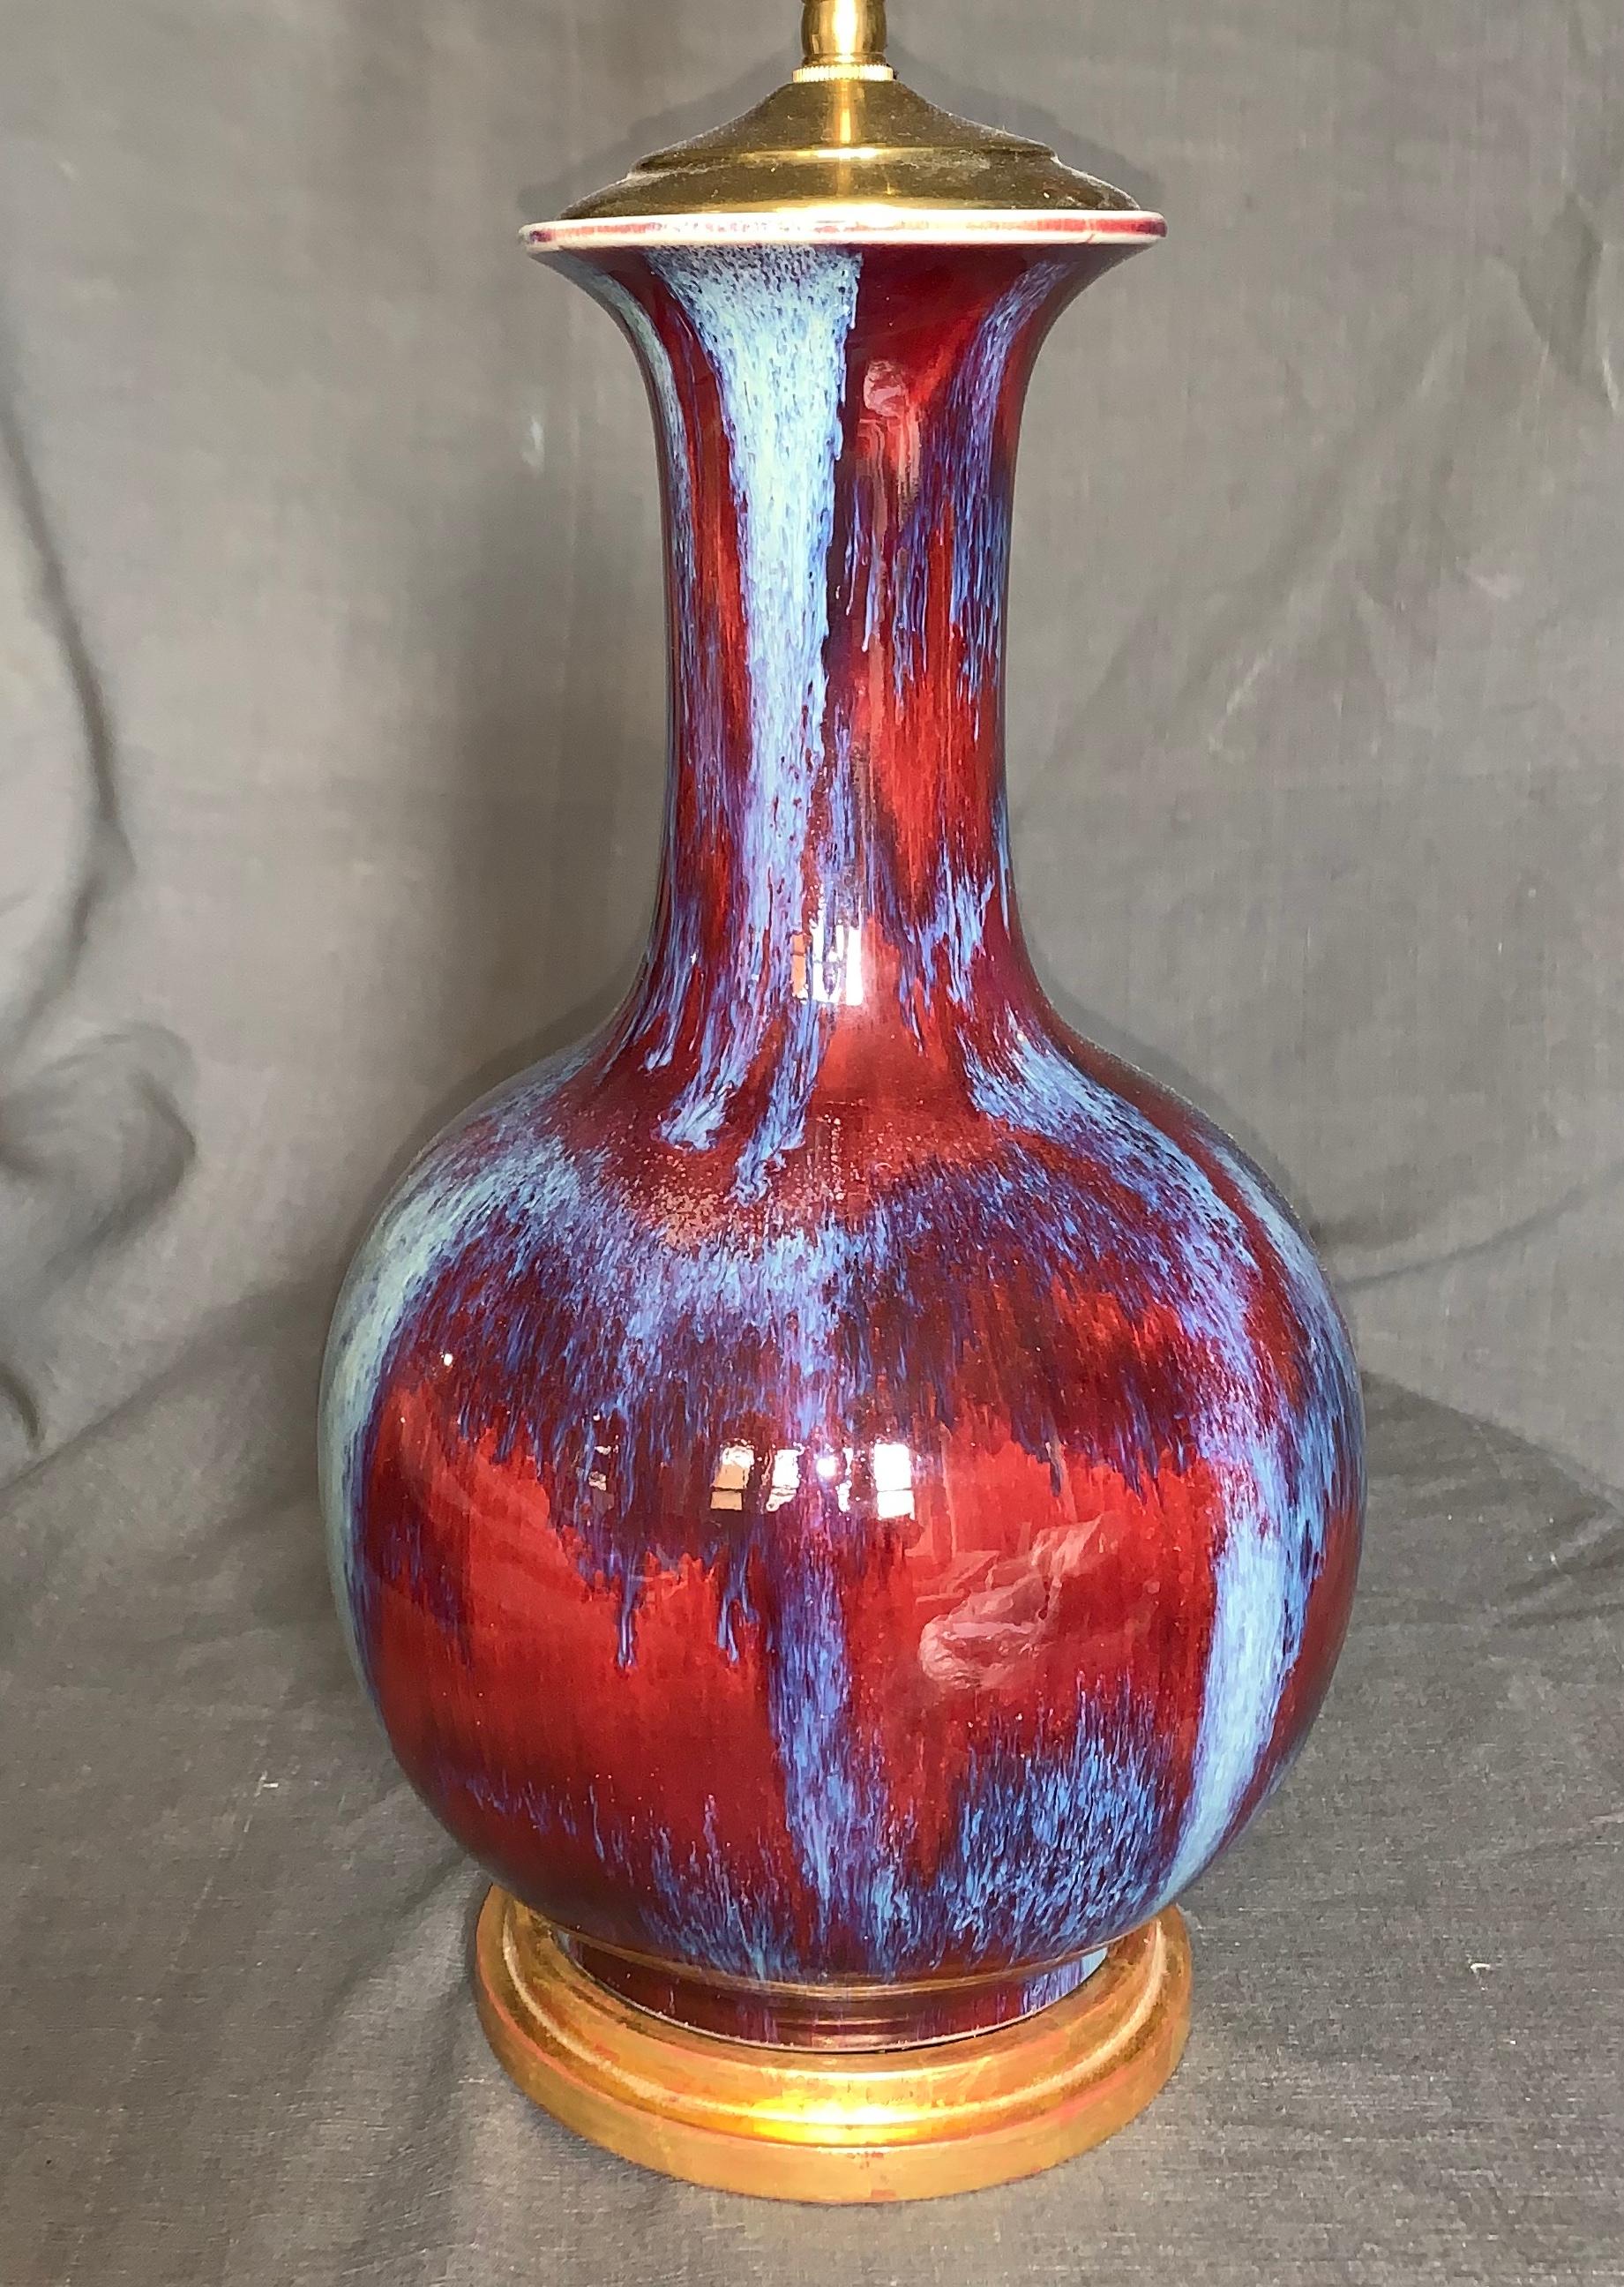 Antique Chinese flambé lamp. Chinese flambé vase in rich mottled red and blue glaze in original condition with gilt water base, not drilled but newly electrified with silk cord and switch. China, mid-19th century. Blue silk lampshade